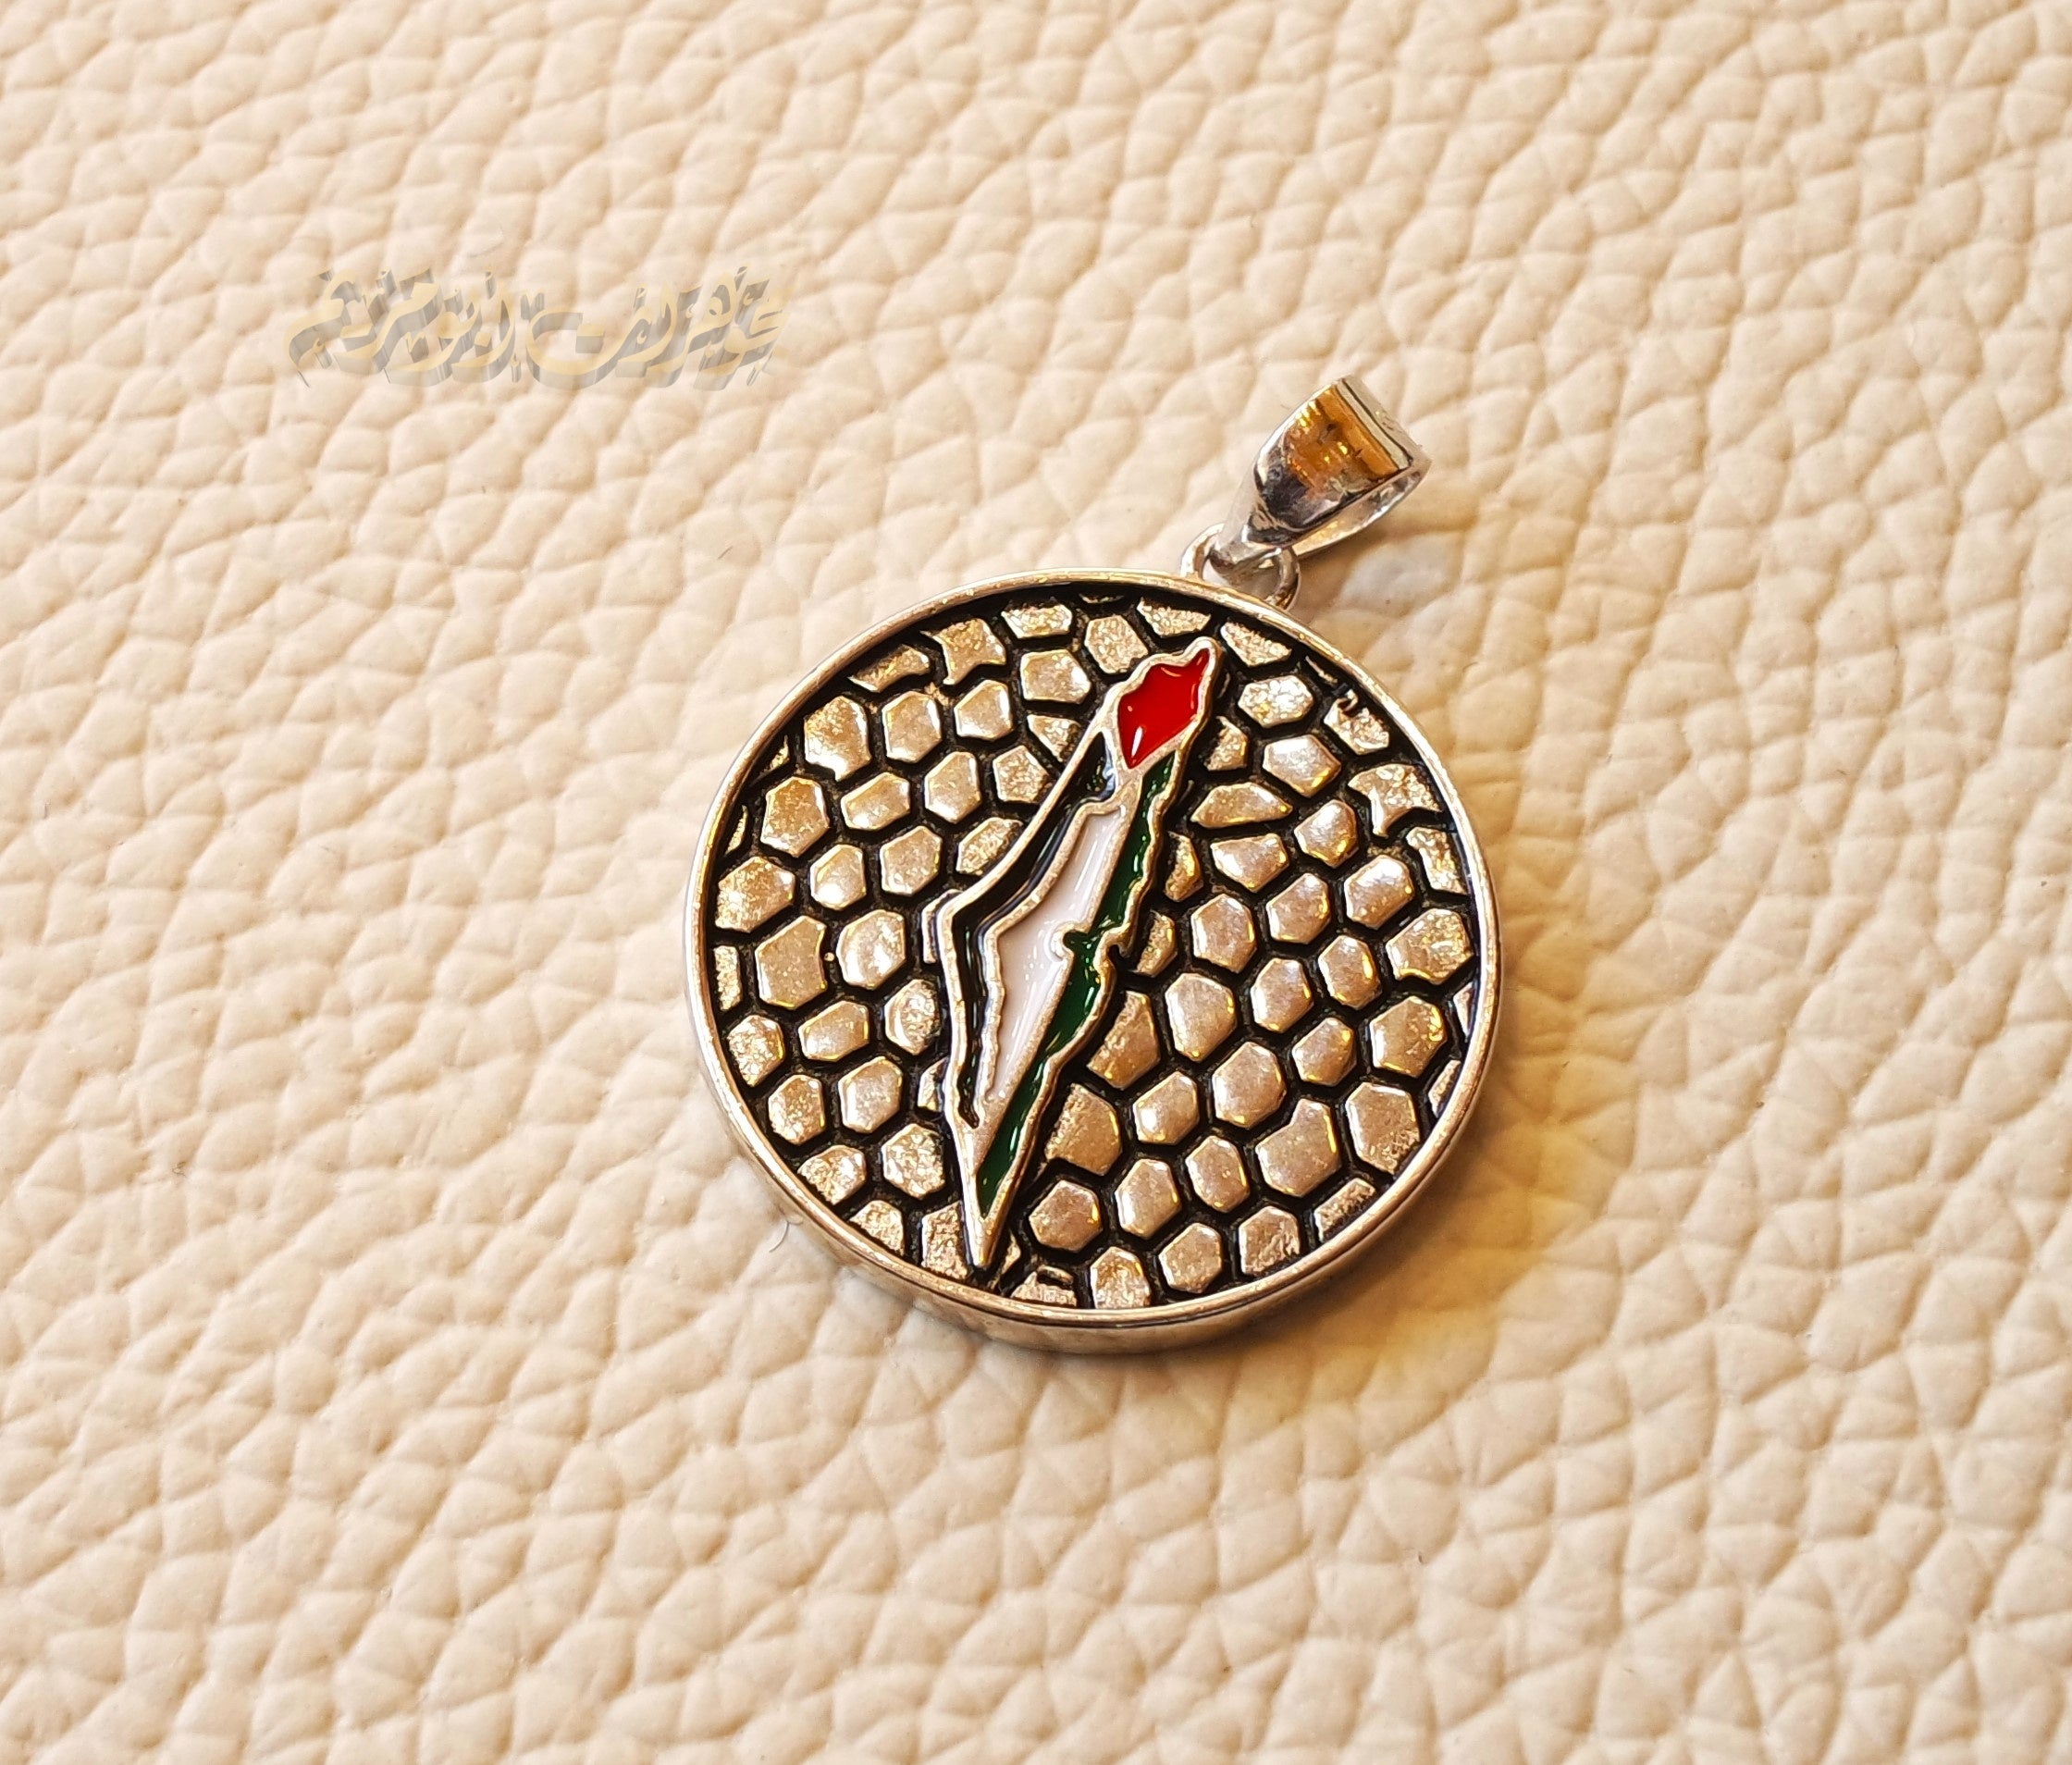 Palestine map flag round double face pendant sterling silver 925 enamel colorful jewelry Arabic خارطه و علم فلسطين